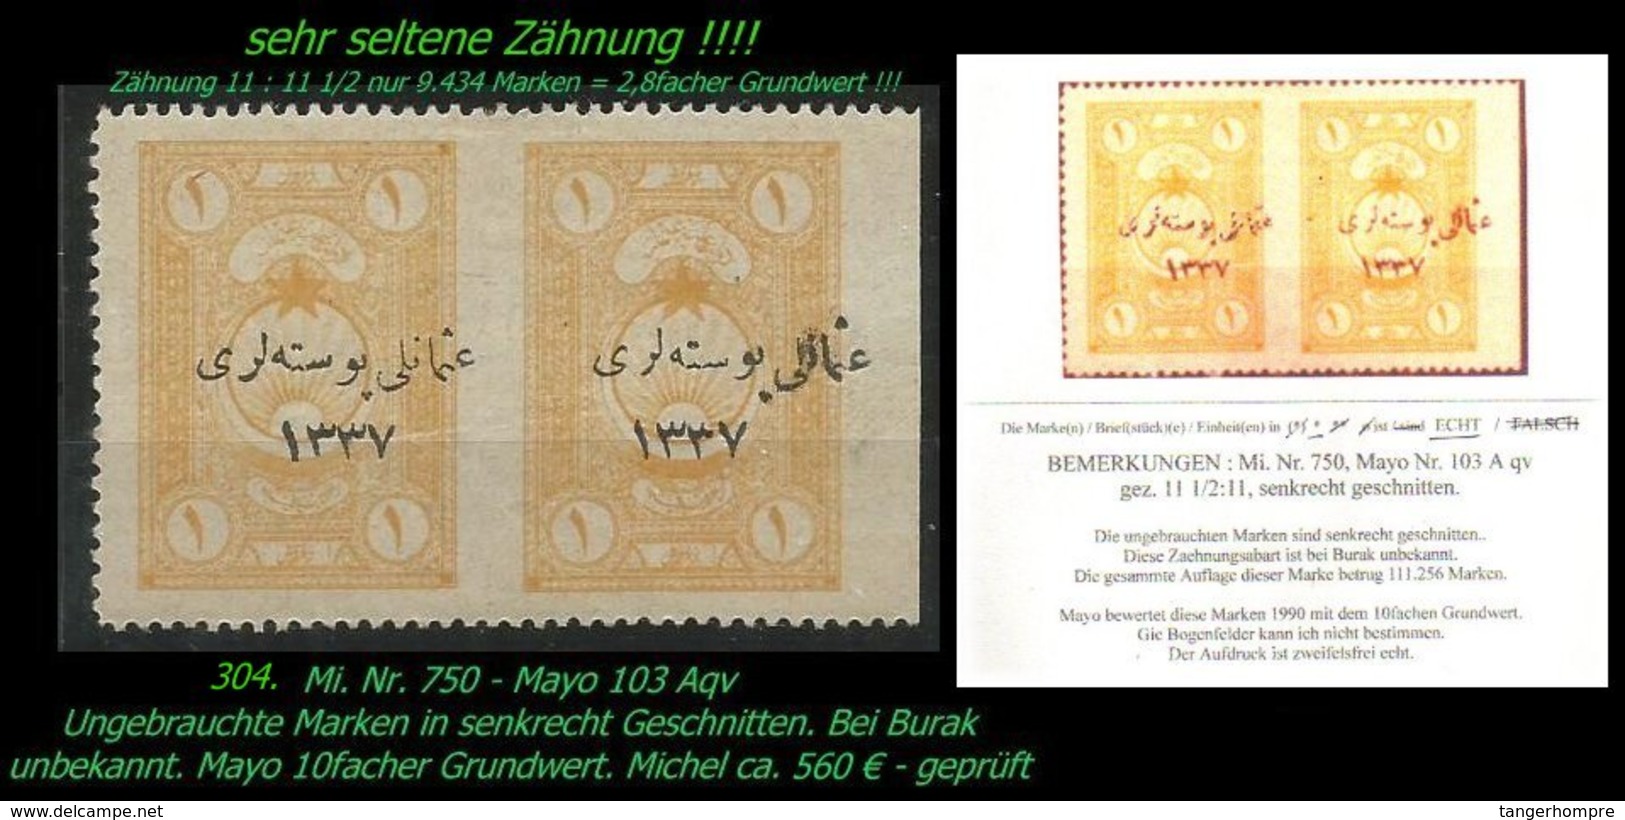 EARLY OTTOMAN SPECIALIZED FOR SPECIALIST, SEE...Mi. Nr. 750 - Mayo 103 Aqv - Teilgezähnt -RRR- - 1920-21 Kleinasien